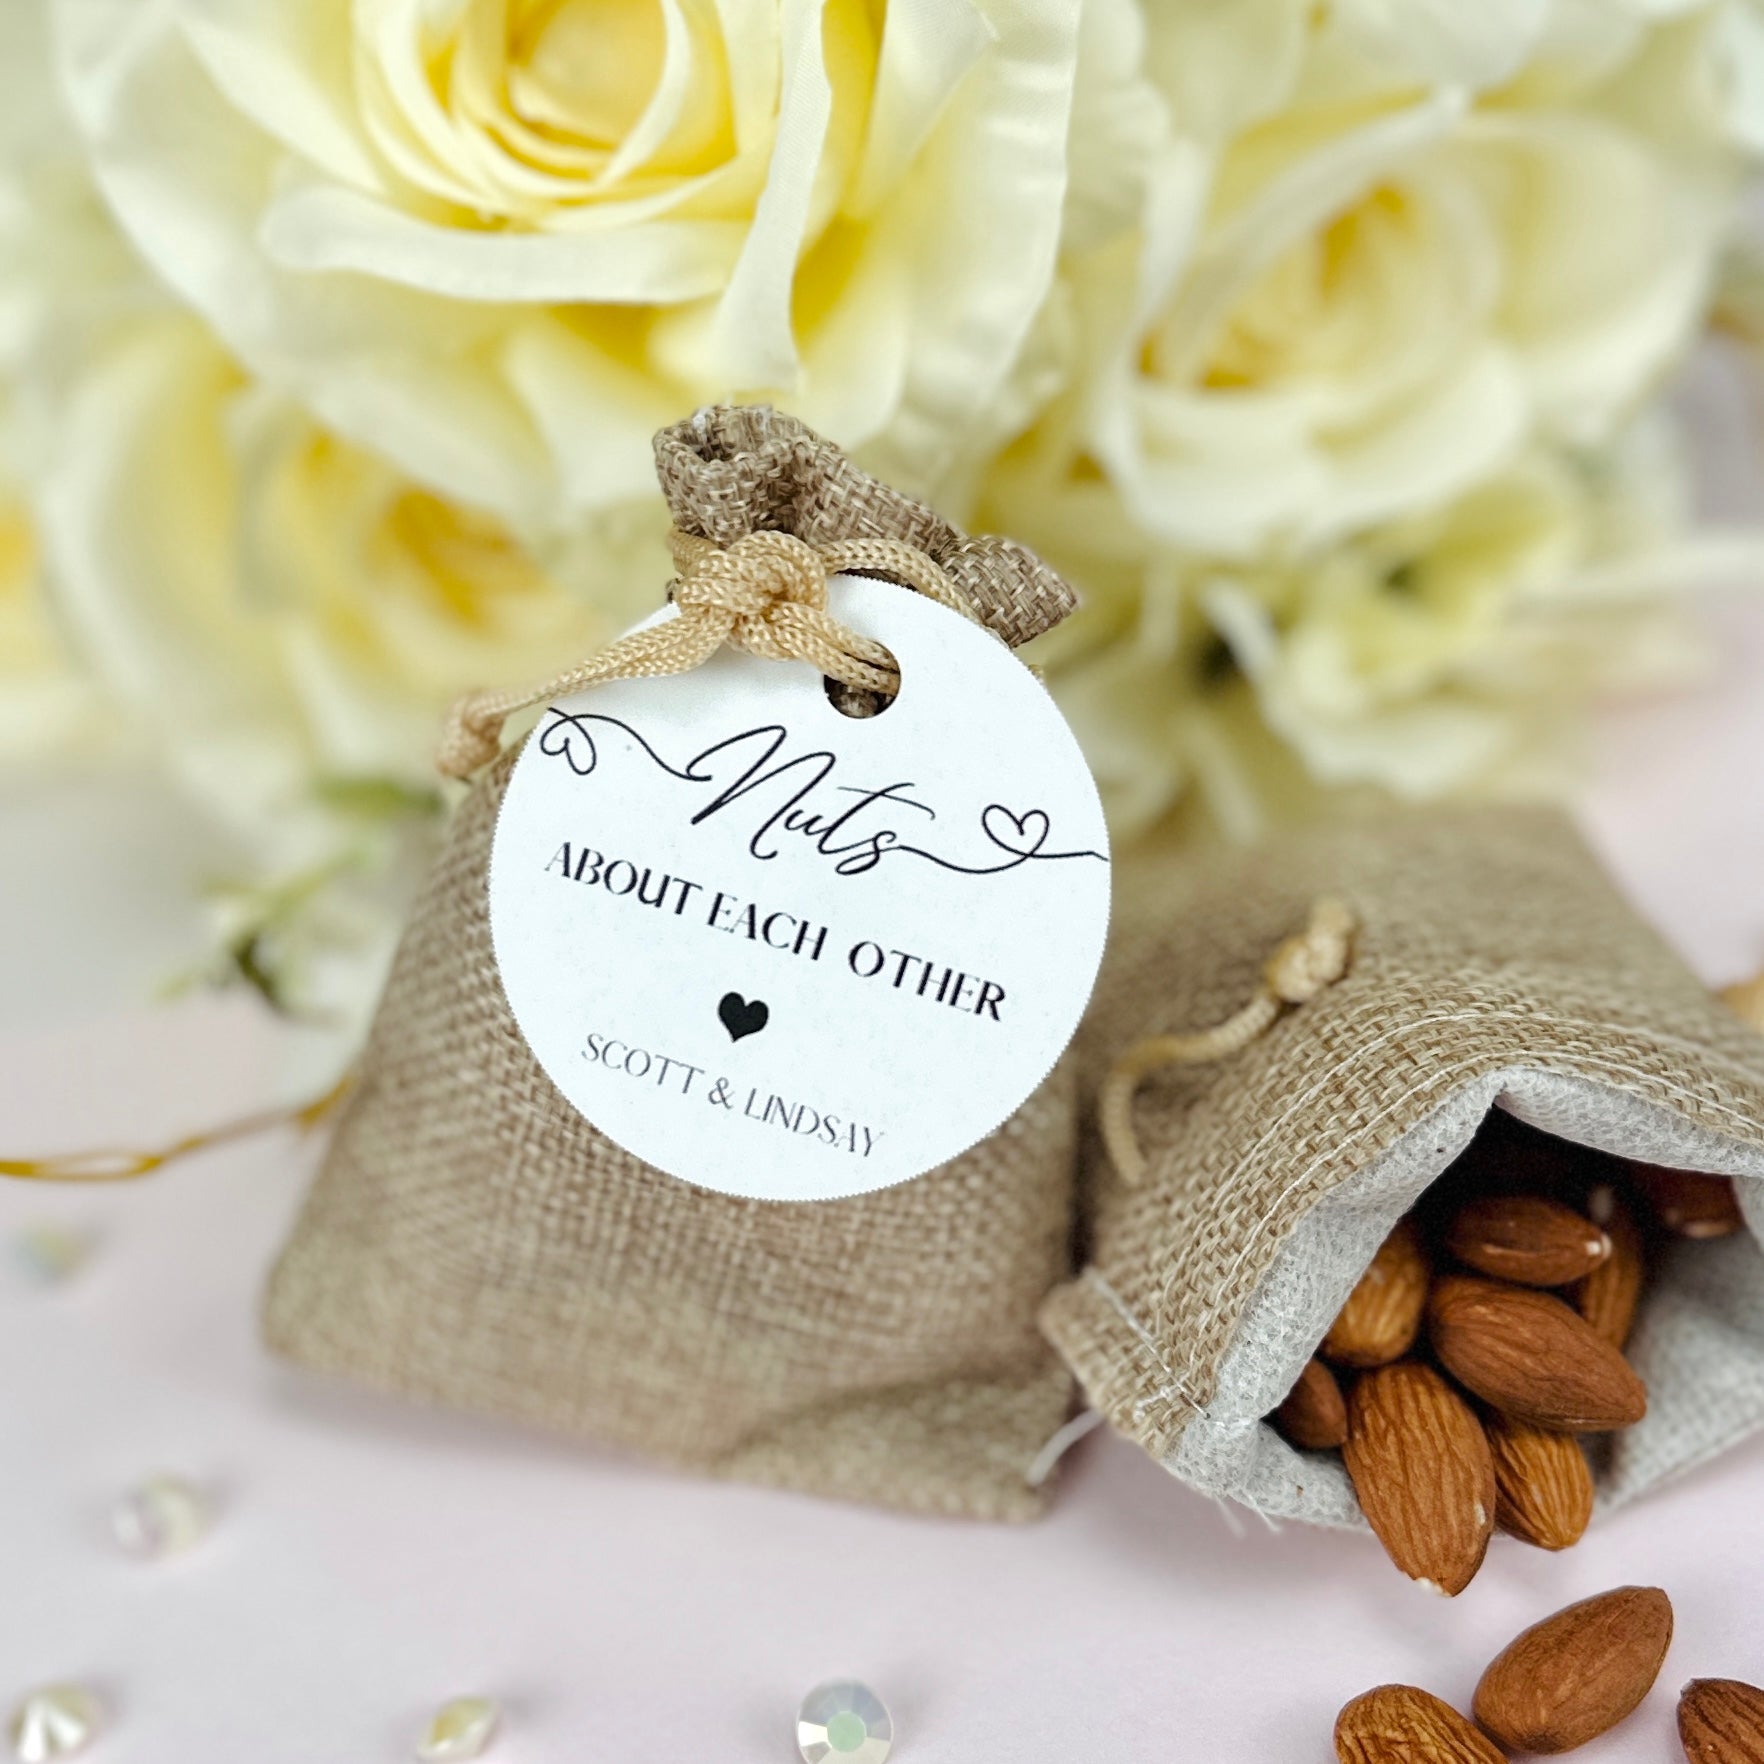 Nuts About Each Other Tag - Forever Wedding Favors